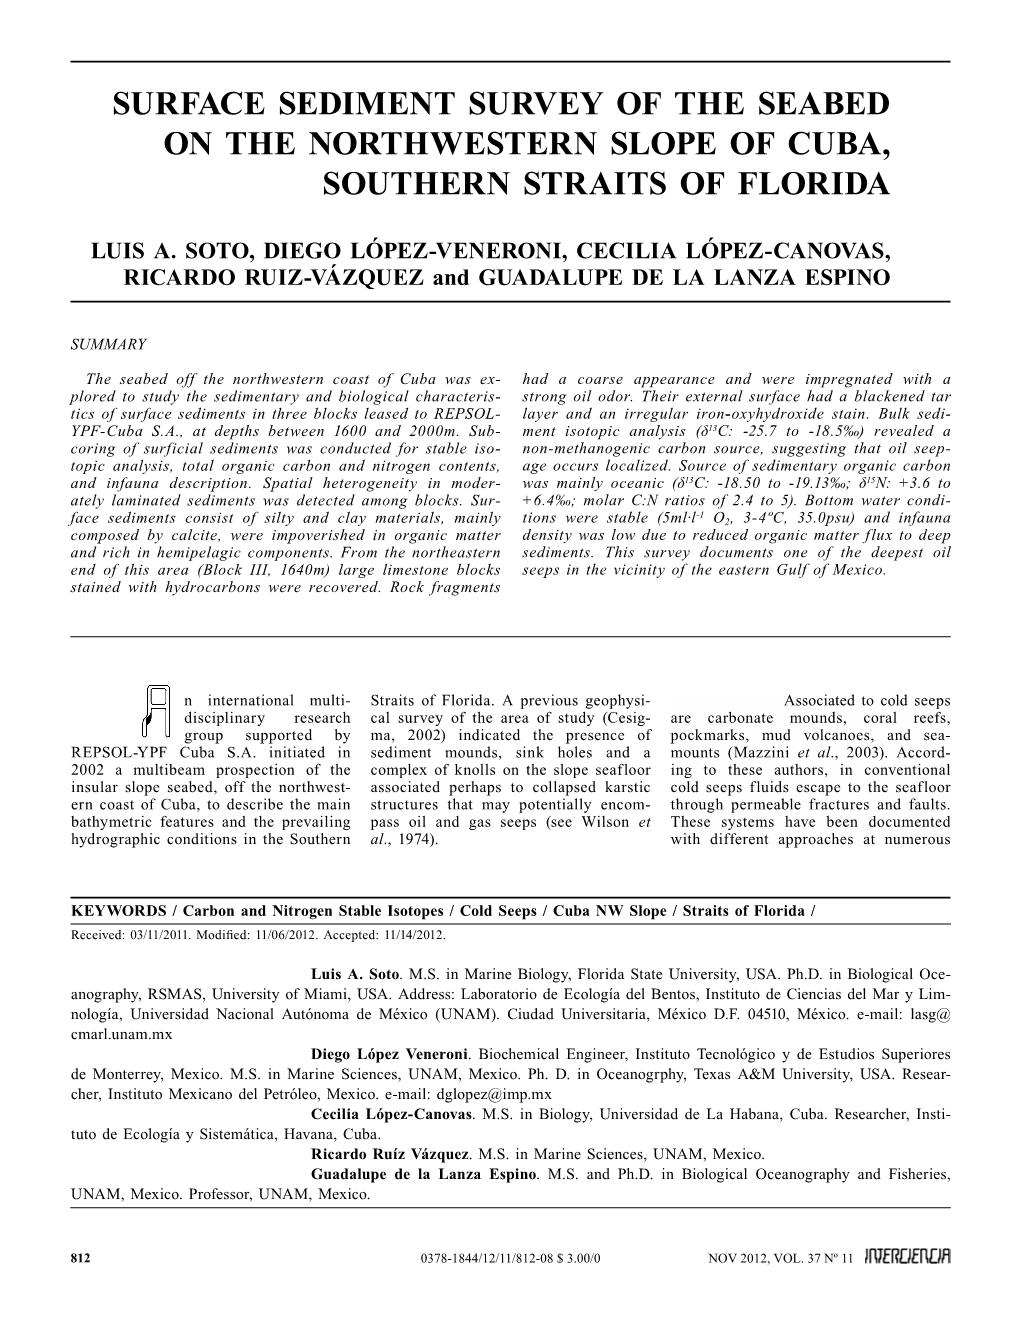 Surface Sediment Survey of the Seabed on the Northwestern Slope of Cuba, Southern Straits of Florida